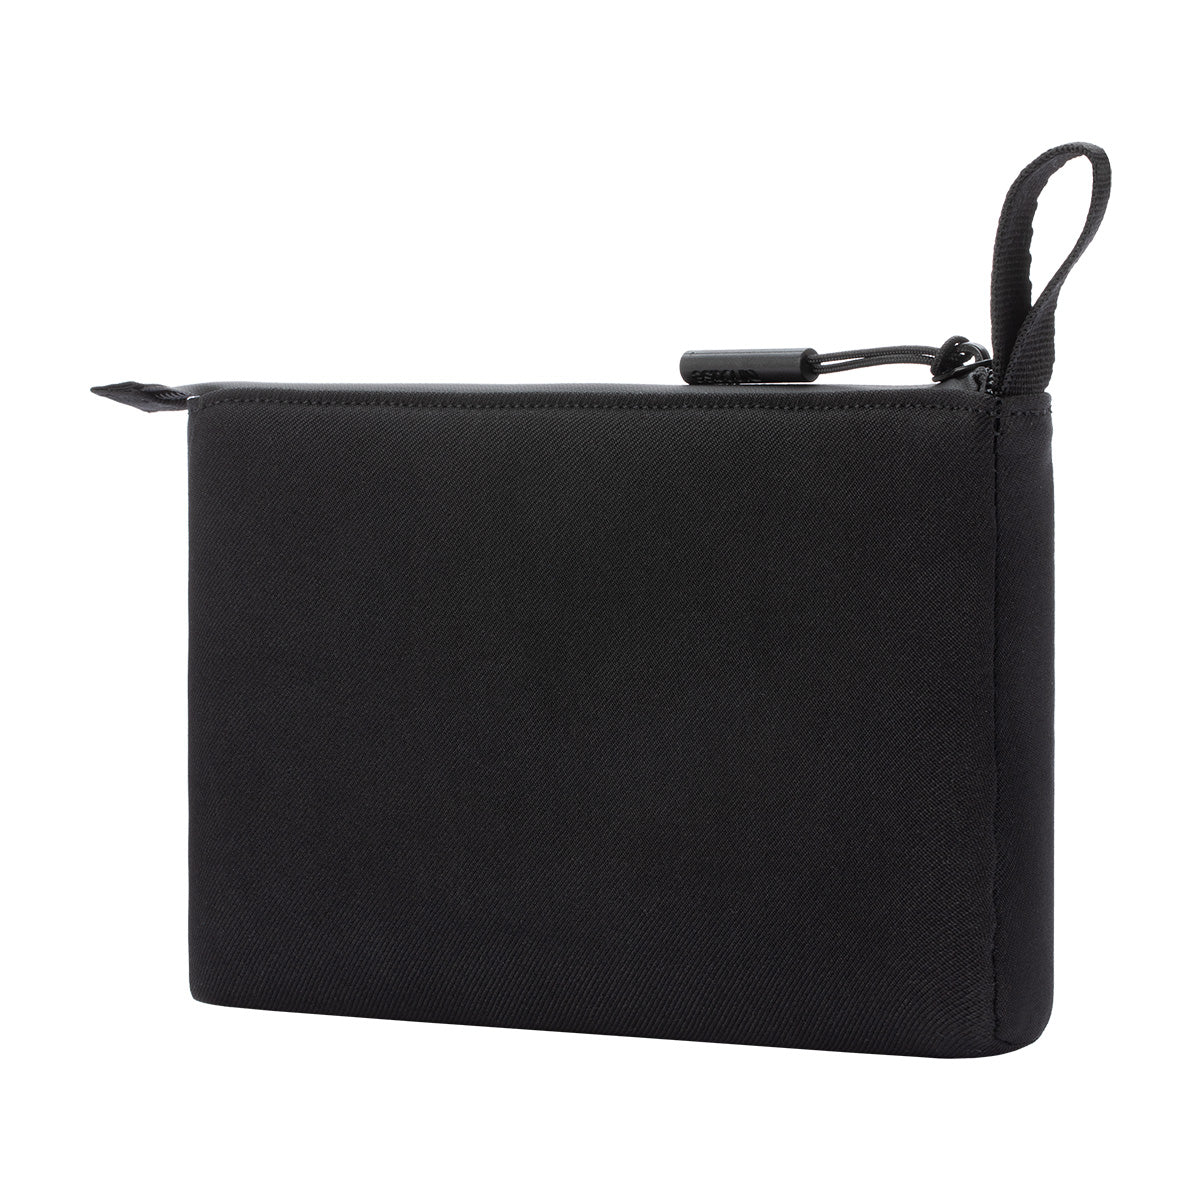 Black | Facet Accessory Organizer in Recycled Twill - Black